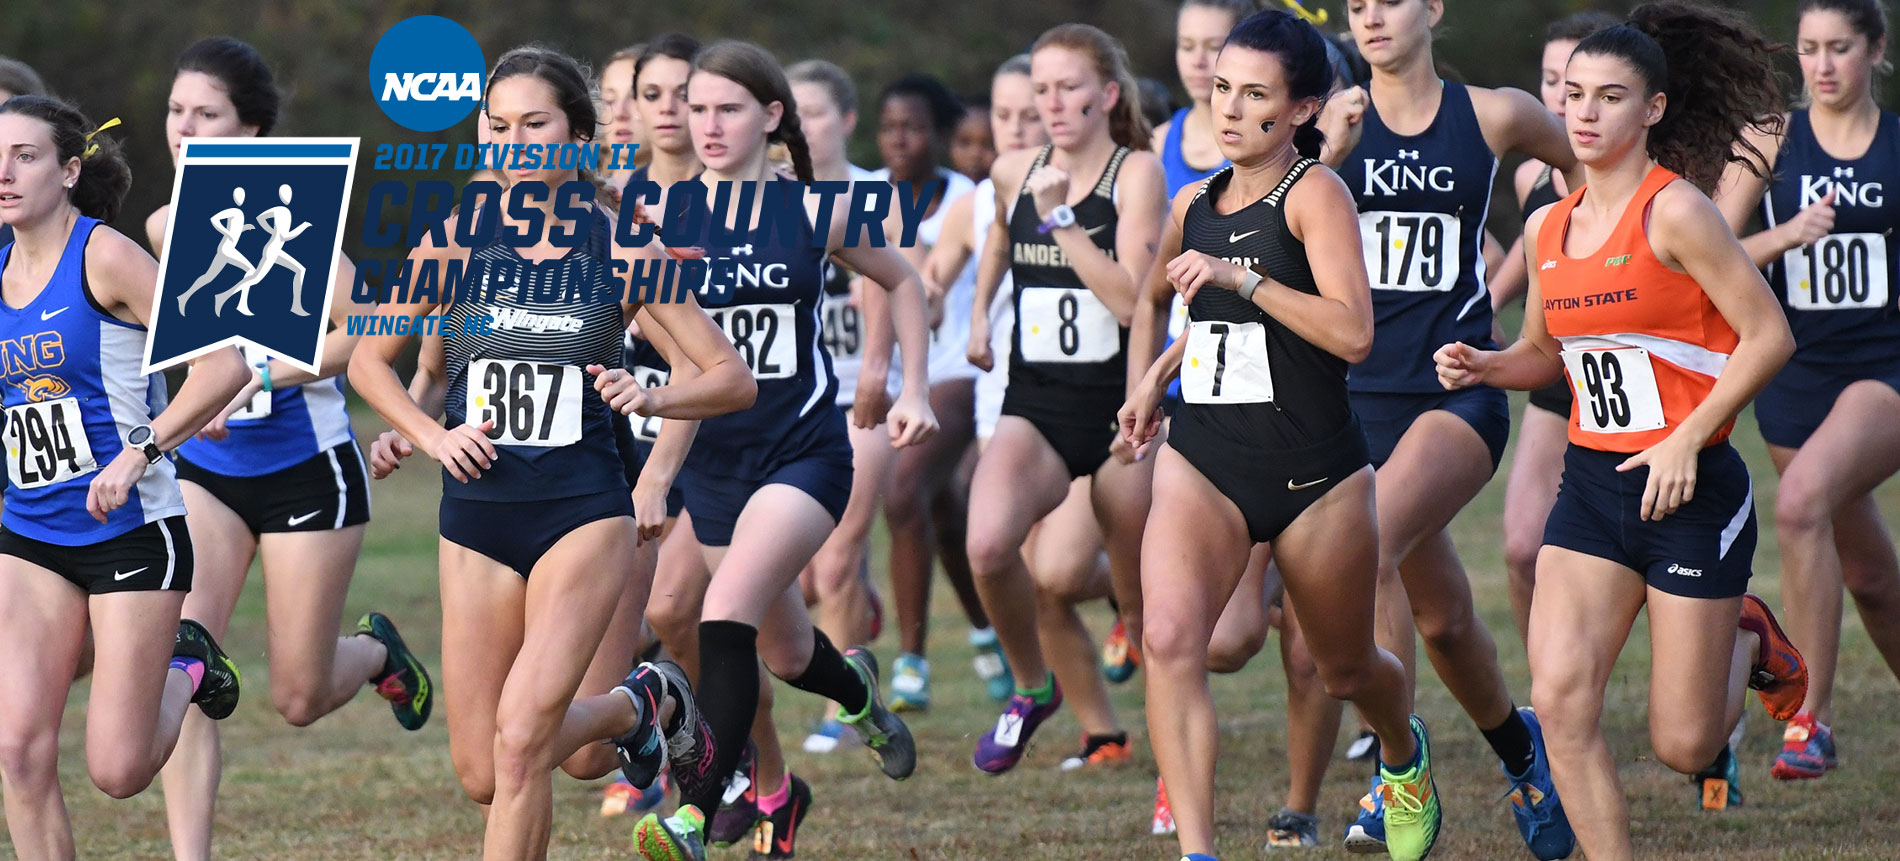 Women’s Cross Country Earns Trip to NCAA Nationals with Second-Place Finish at NCAA Southeast Region Championships